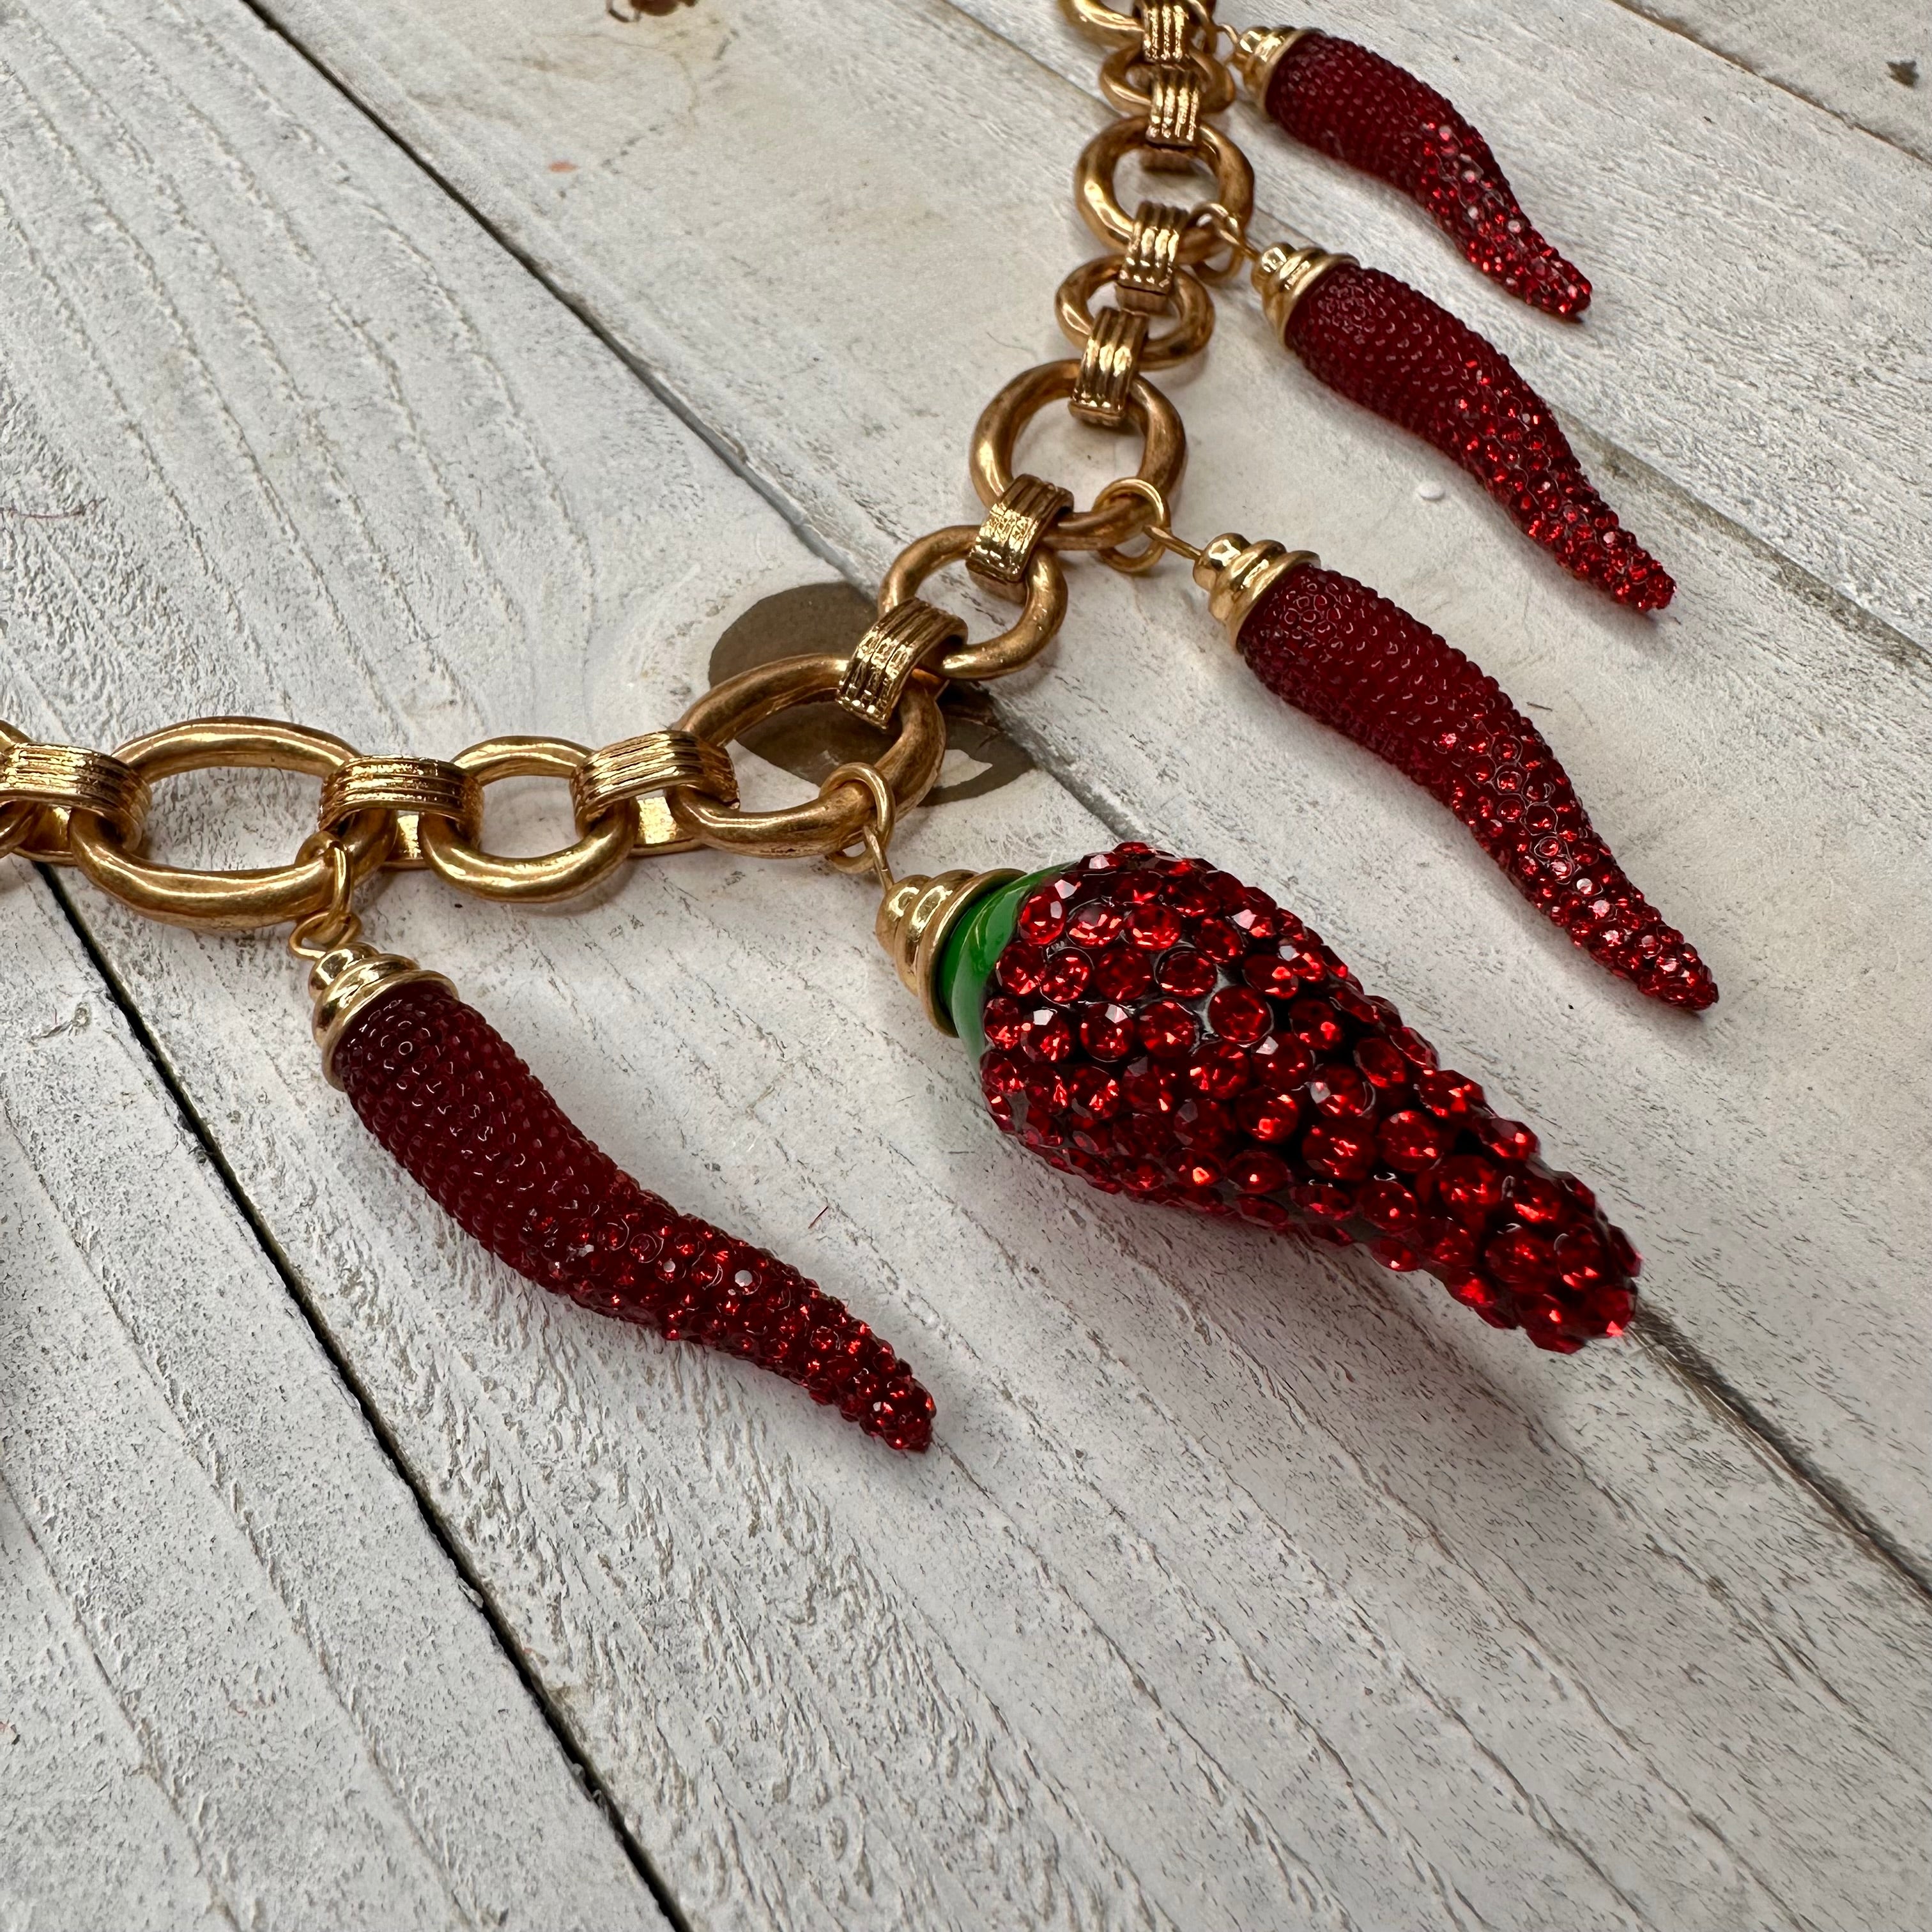 Red Chili Pepper Necklace, Red Hot Chili Pepper Spicy Jewelry Gift, N4 –  Lebua Jewelry®